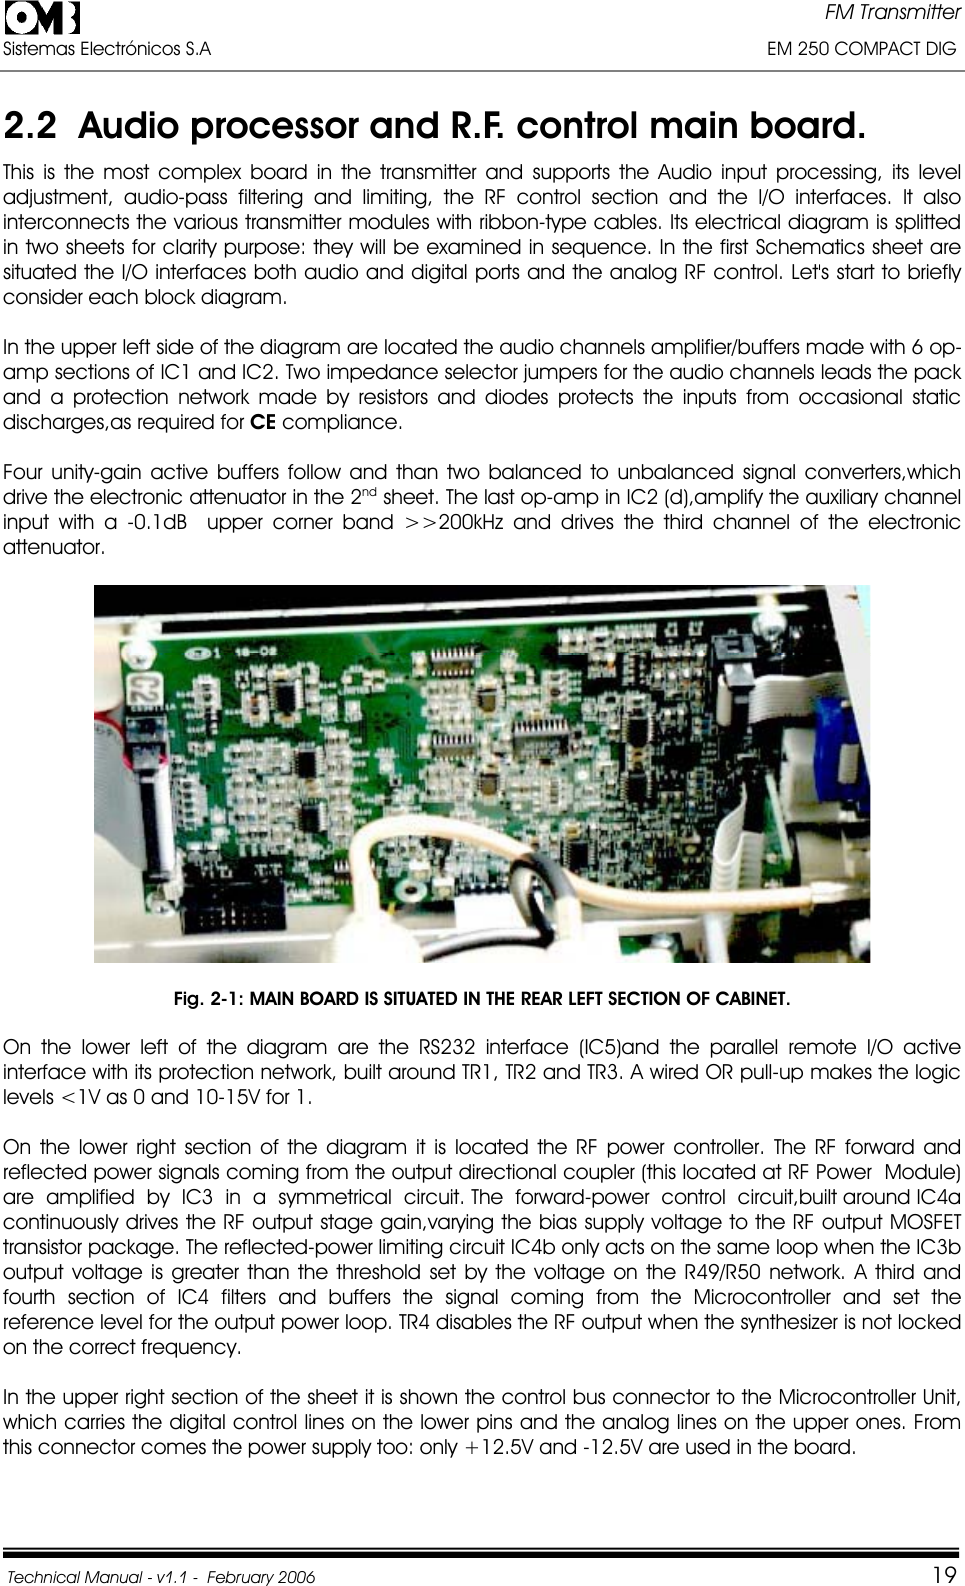 FM Transmitter Sistemas Electrónicos S.A                                                                                                         EM 250 COMPACT DIG  Technical Manual - v1.1 -  February 2006                                    192.2  Audio processor and R.F. control main board. This is the most complex board in the transmitter and supports the Audio input processing, its level adjustment, audio-pass filtering and limiting, the RF control section and the I/O interfaces. It also interconnects the various transmitter modules with ribbon-type cables. Its electrical diagram is splitted in two sheets for clarity purpose: they will be examined in sequence. In the first Schematics sheet are situated the I/O interfaces both audio and digital ports and the analog RF control. Let&apos;s start to briefly consider each block diagram. In the upper left side of the diagram are located the audio channels amplifier/buffers made with 6 op-amp sections of IC1 and IC2. Two impedance selector jumpers for the audio channels leads the pack and a protection network made by resistors and diodes protects the inputs from occasional static discharges,as required for CE compliance. Four unity-gain active buffers follow and than two balanced to unbalanced signal converters,which drive the electronic attenuator in the 2nd sheet. The last op-amp in IC2 (d),amplify the auxiliary channel input with a -0.1dB  upper corner band &gt;&gt;200kHz and drives the third channel of the electronic attenuator.  Fig. 2-1: MAIN BOARD IS SITUATED IN THE REAR LEFT SECTION OF CABINET. On the lower left of the diagram are the RS232 interface (IC5)and the parallel remote I/O active interface with its protection network, built around TR1, TR2 and TR3. A wired OR pull-up makes the logic levels &lt;1V as 0 and 10-15V for 1. On the lower right section of the diagram it is located the RF power controller. The RF forward and reflected power signals coming from the output directional coupler (this located at RF Power  Module)  are  amplified  by  IC3  in  a  symmetrical  circuit. The  forward-power  control  circuit,built around IC4a continuously drives the RF output stage gain,varying the bias supply voltage to the RF output MOSFET transistor package. The reflected-power limiting circuit IC4b only acts on the same loop when the IC3b output voltage is greater than the threshold set by the voltage on the R49/R50 network. A third and fourth section of IC4 filters and buffers the signal coming from the Microcontroller and set the reference level for the output power loop. TR4 disables the RF output when the synthesizer is not locked on the correct frequency. In the upper right section of the sheet it is shown the control bus connector to the Microcontroller Unit, which carries the digital control lines on the lower pins and the analog lines on the upper ones. From this connector comes the power supply too: only +12.5V and -12.5V are used in the board. 